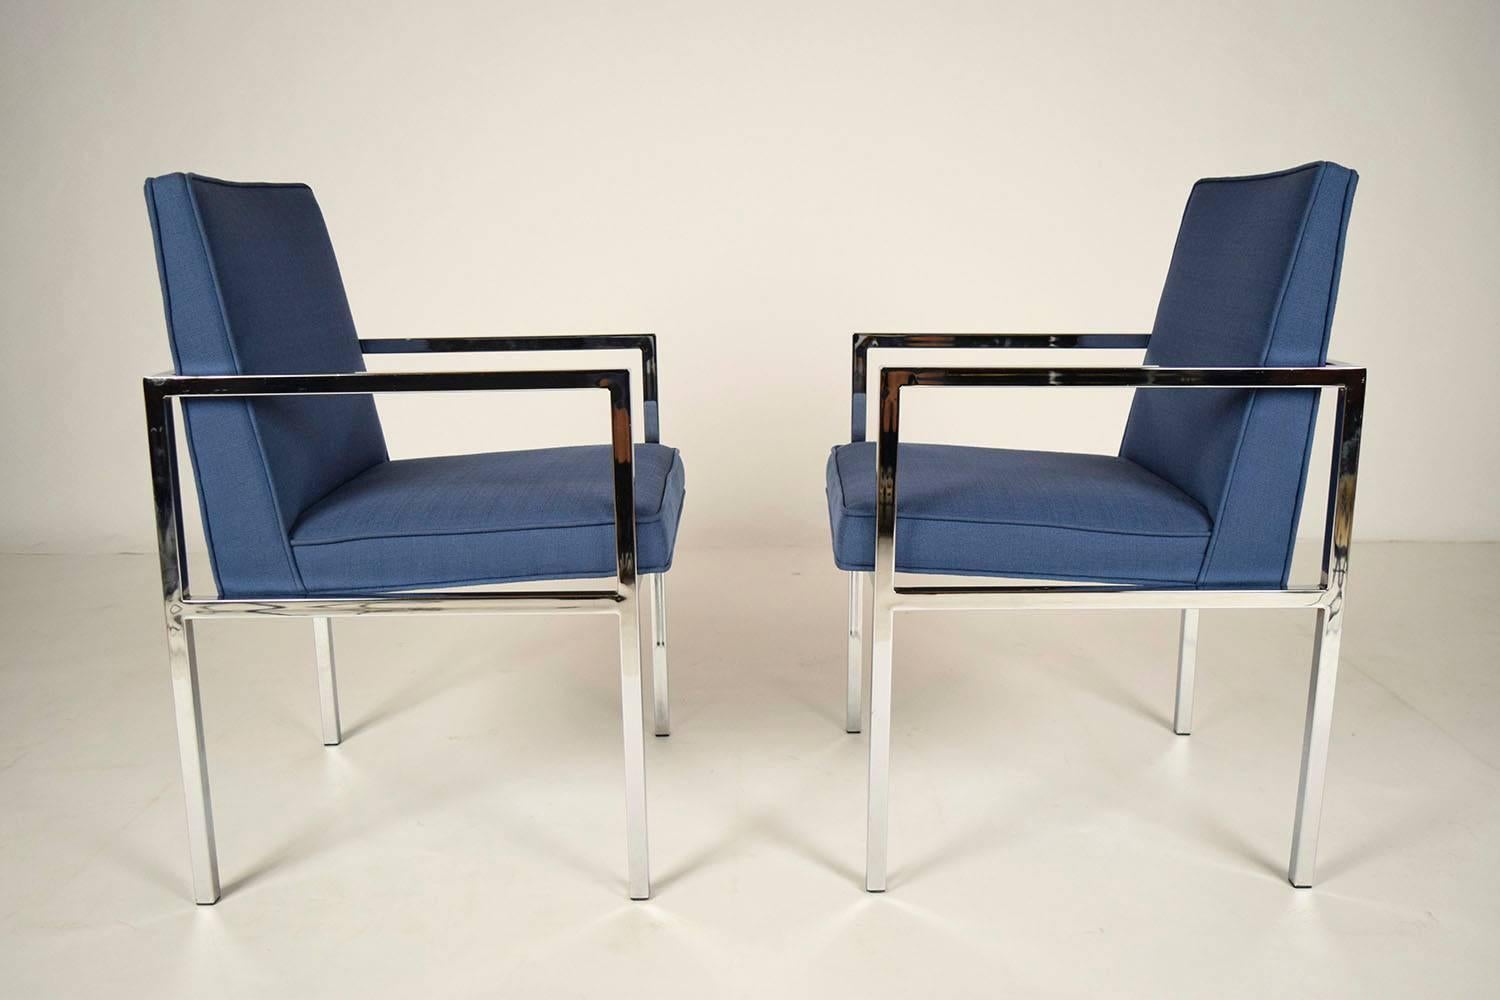 Pair of 1970s armchairs. Solid steel frames, with a bright chrome finish. They have been professionally upholstered in blue fabric, with single piping trim. Chairs are solid and sturdy, very comfy ready to be used.
Measures: Arm height 24